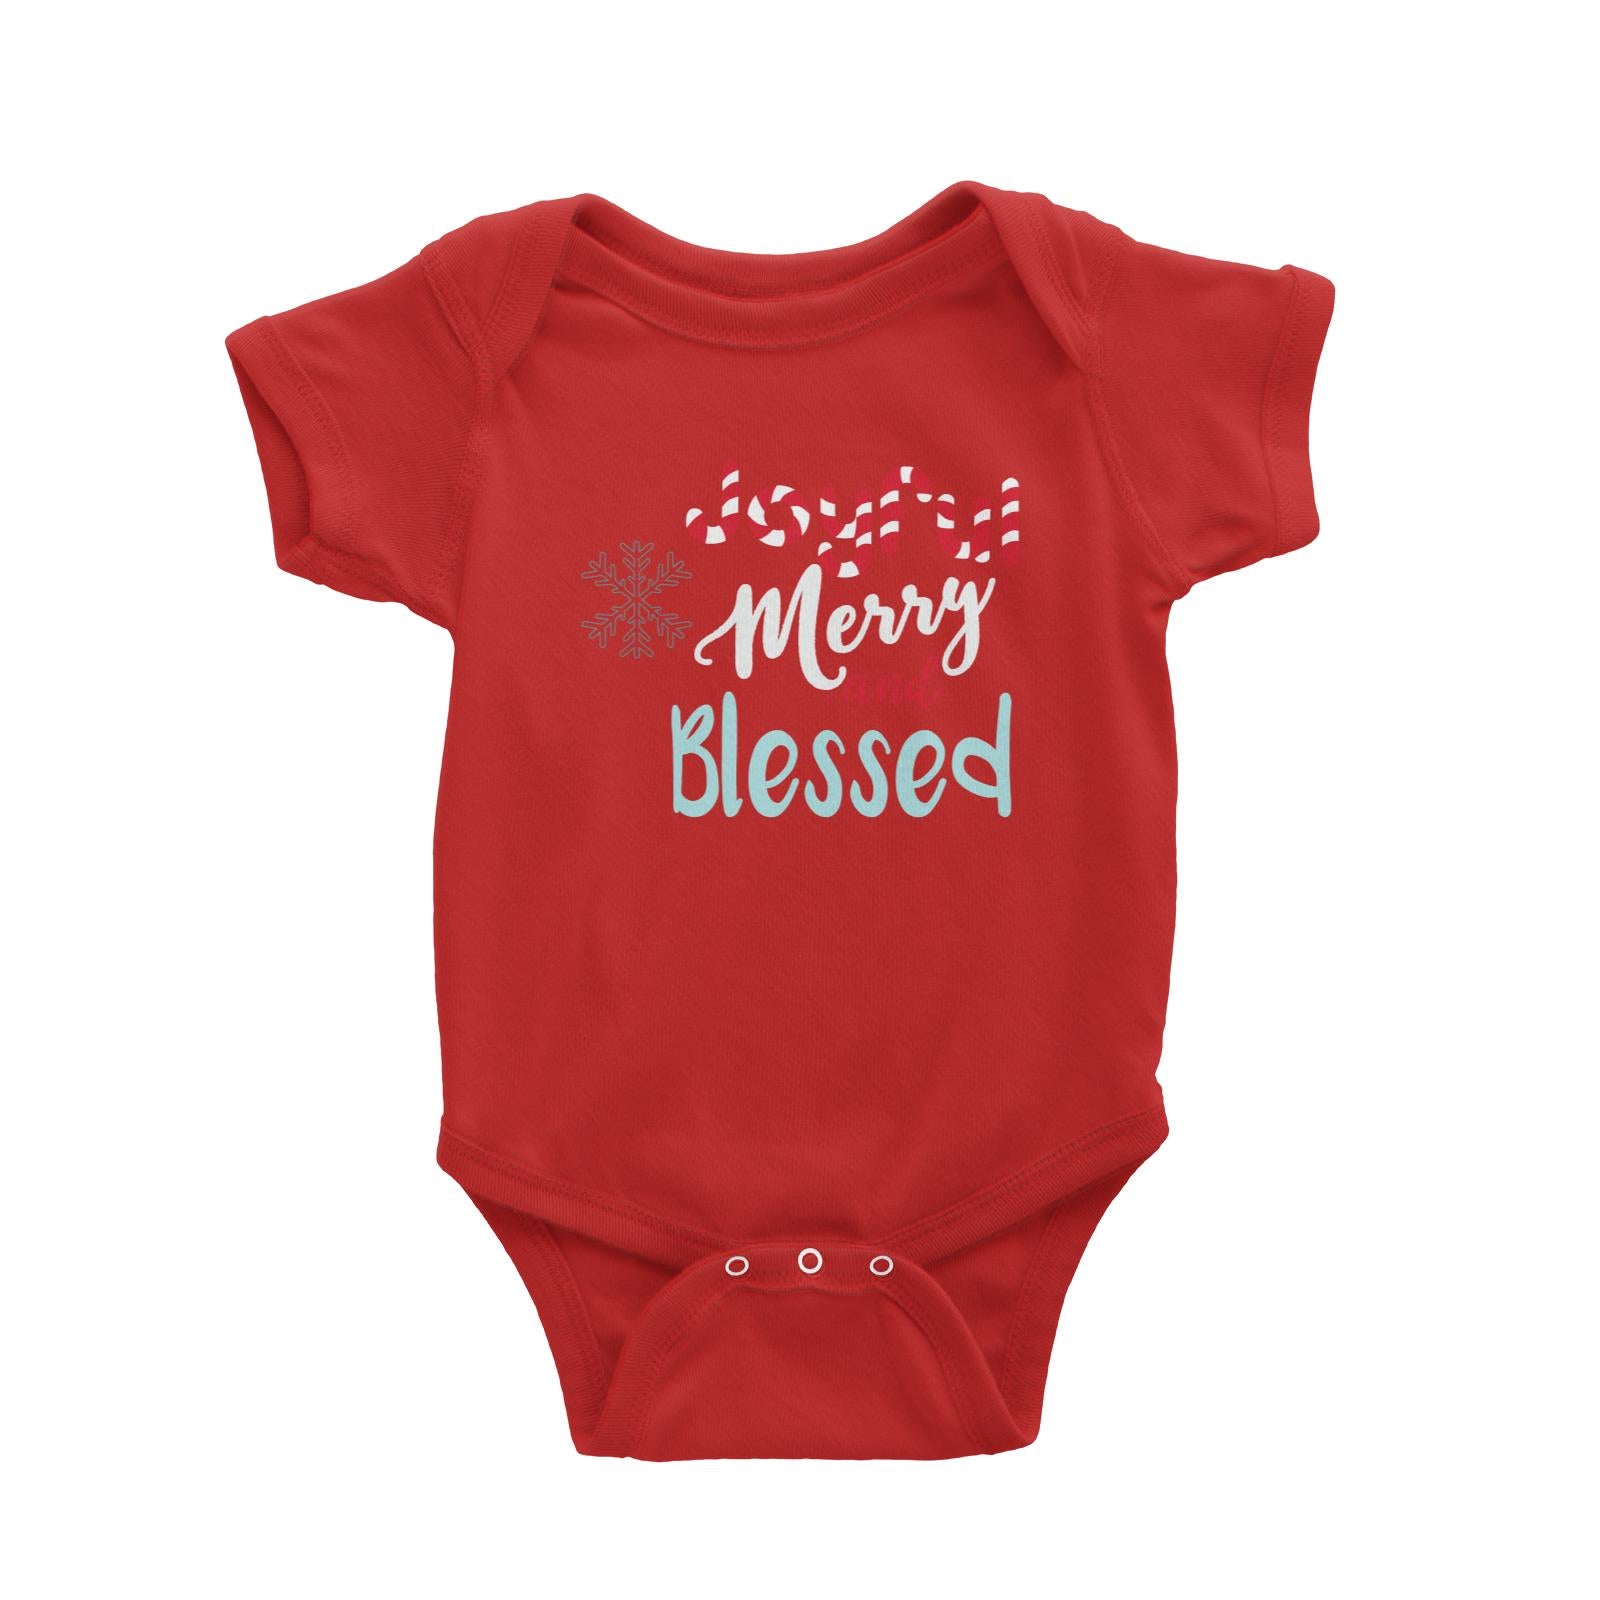 Joyful Merry and Blessed Baby Romper Christmas